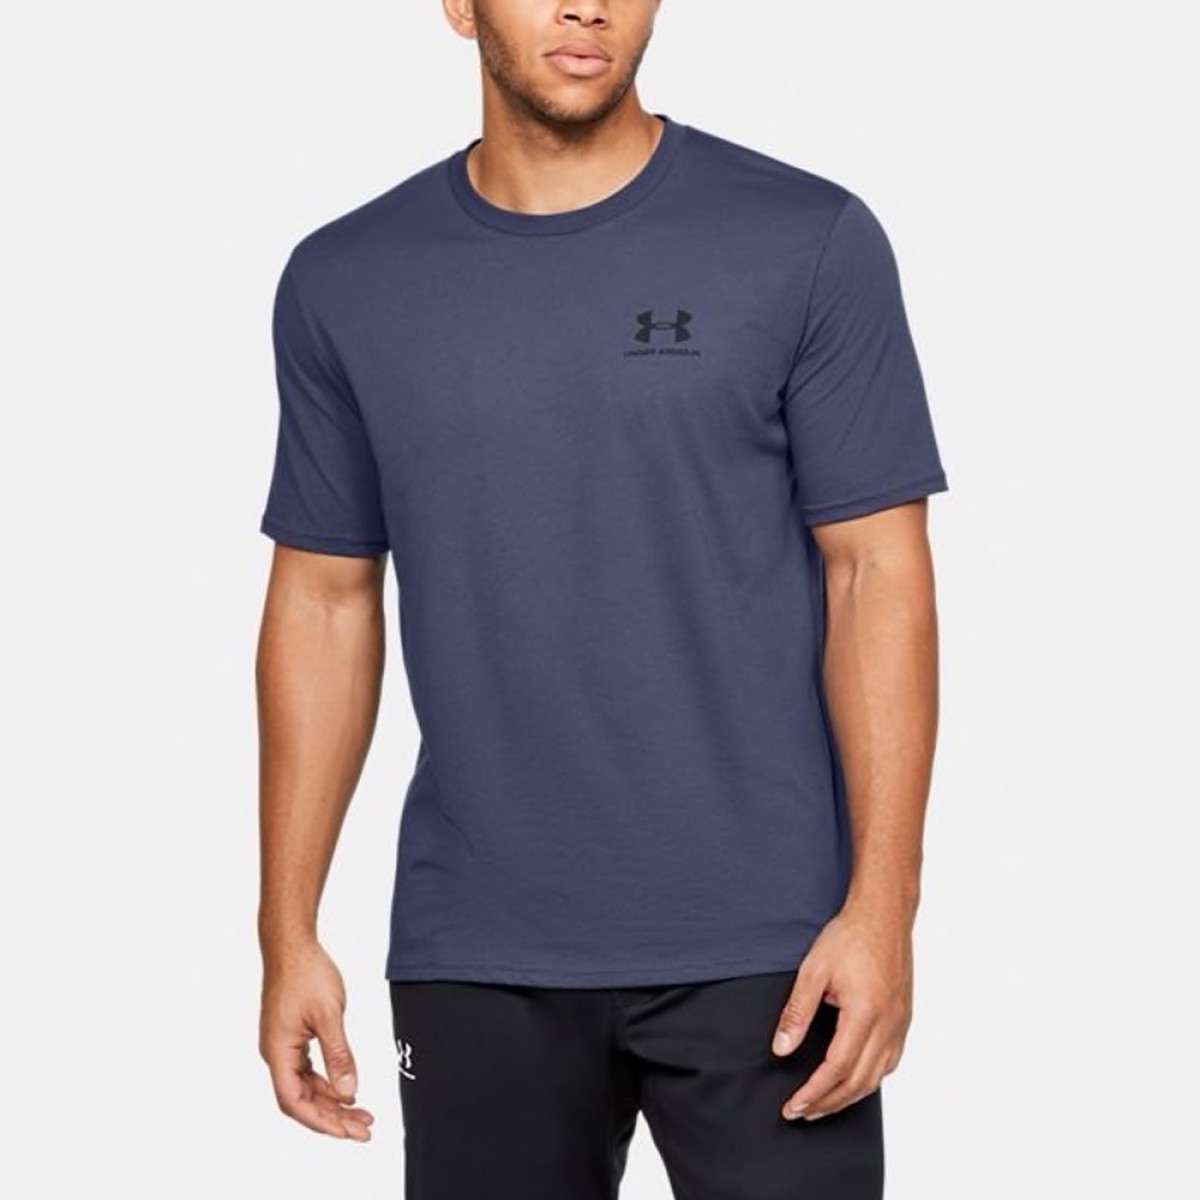 Under Armour Sportstyle Left Chest Logo T-Shirt Loose: Fuller cut for ...